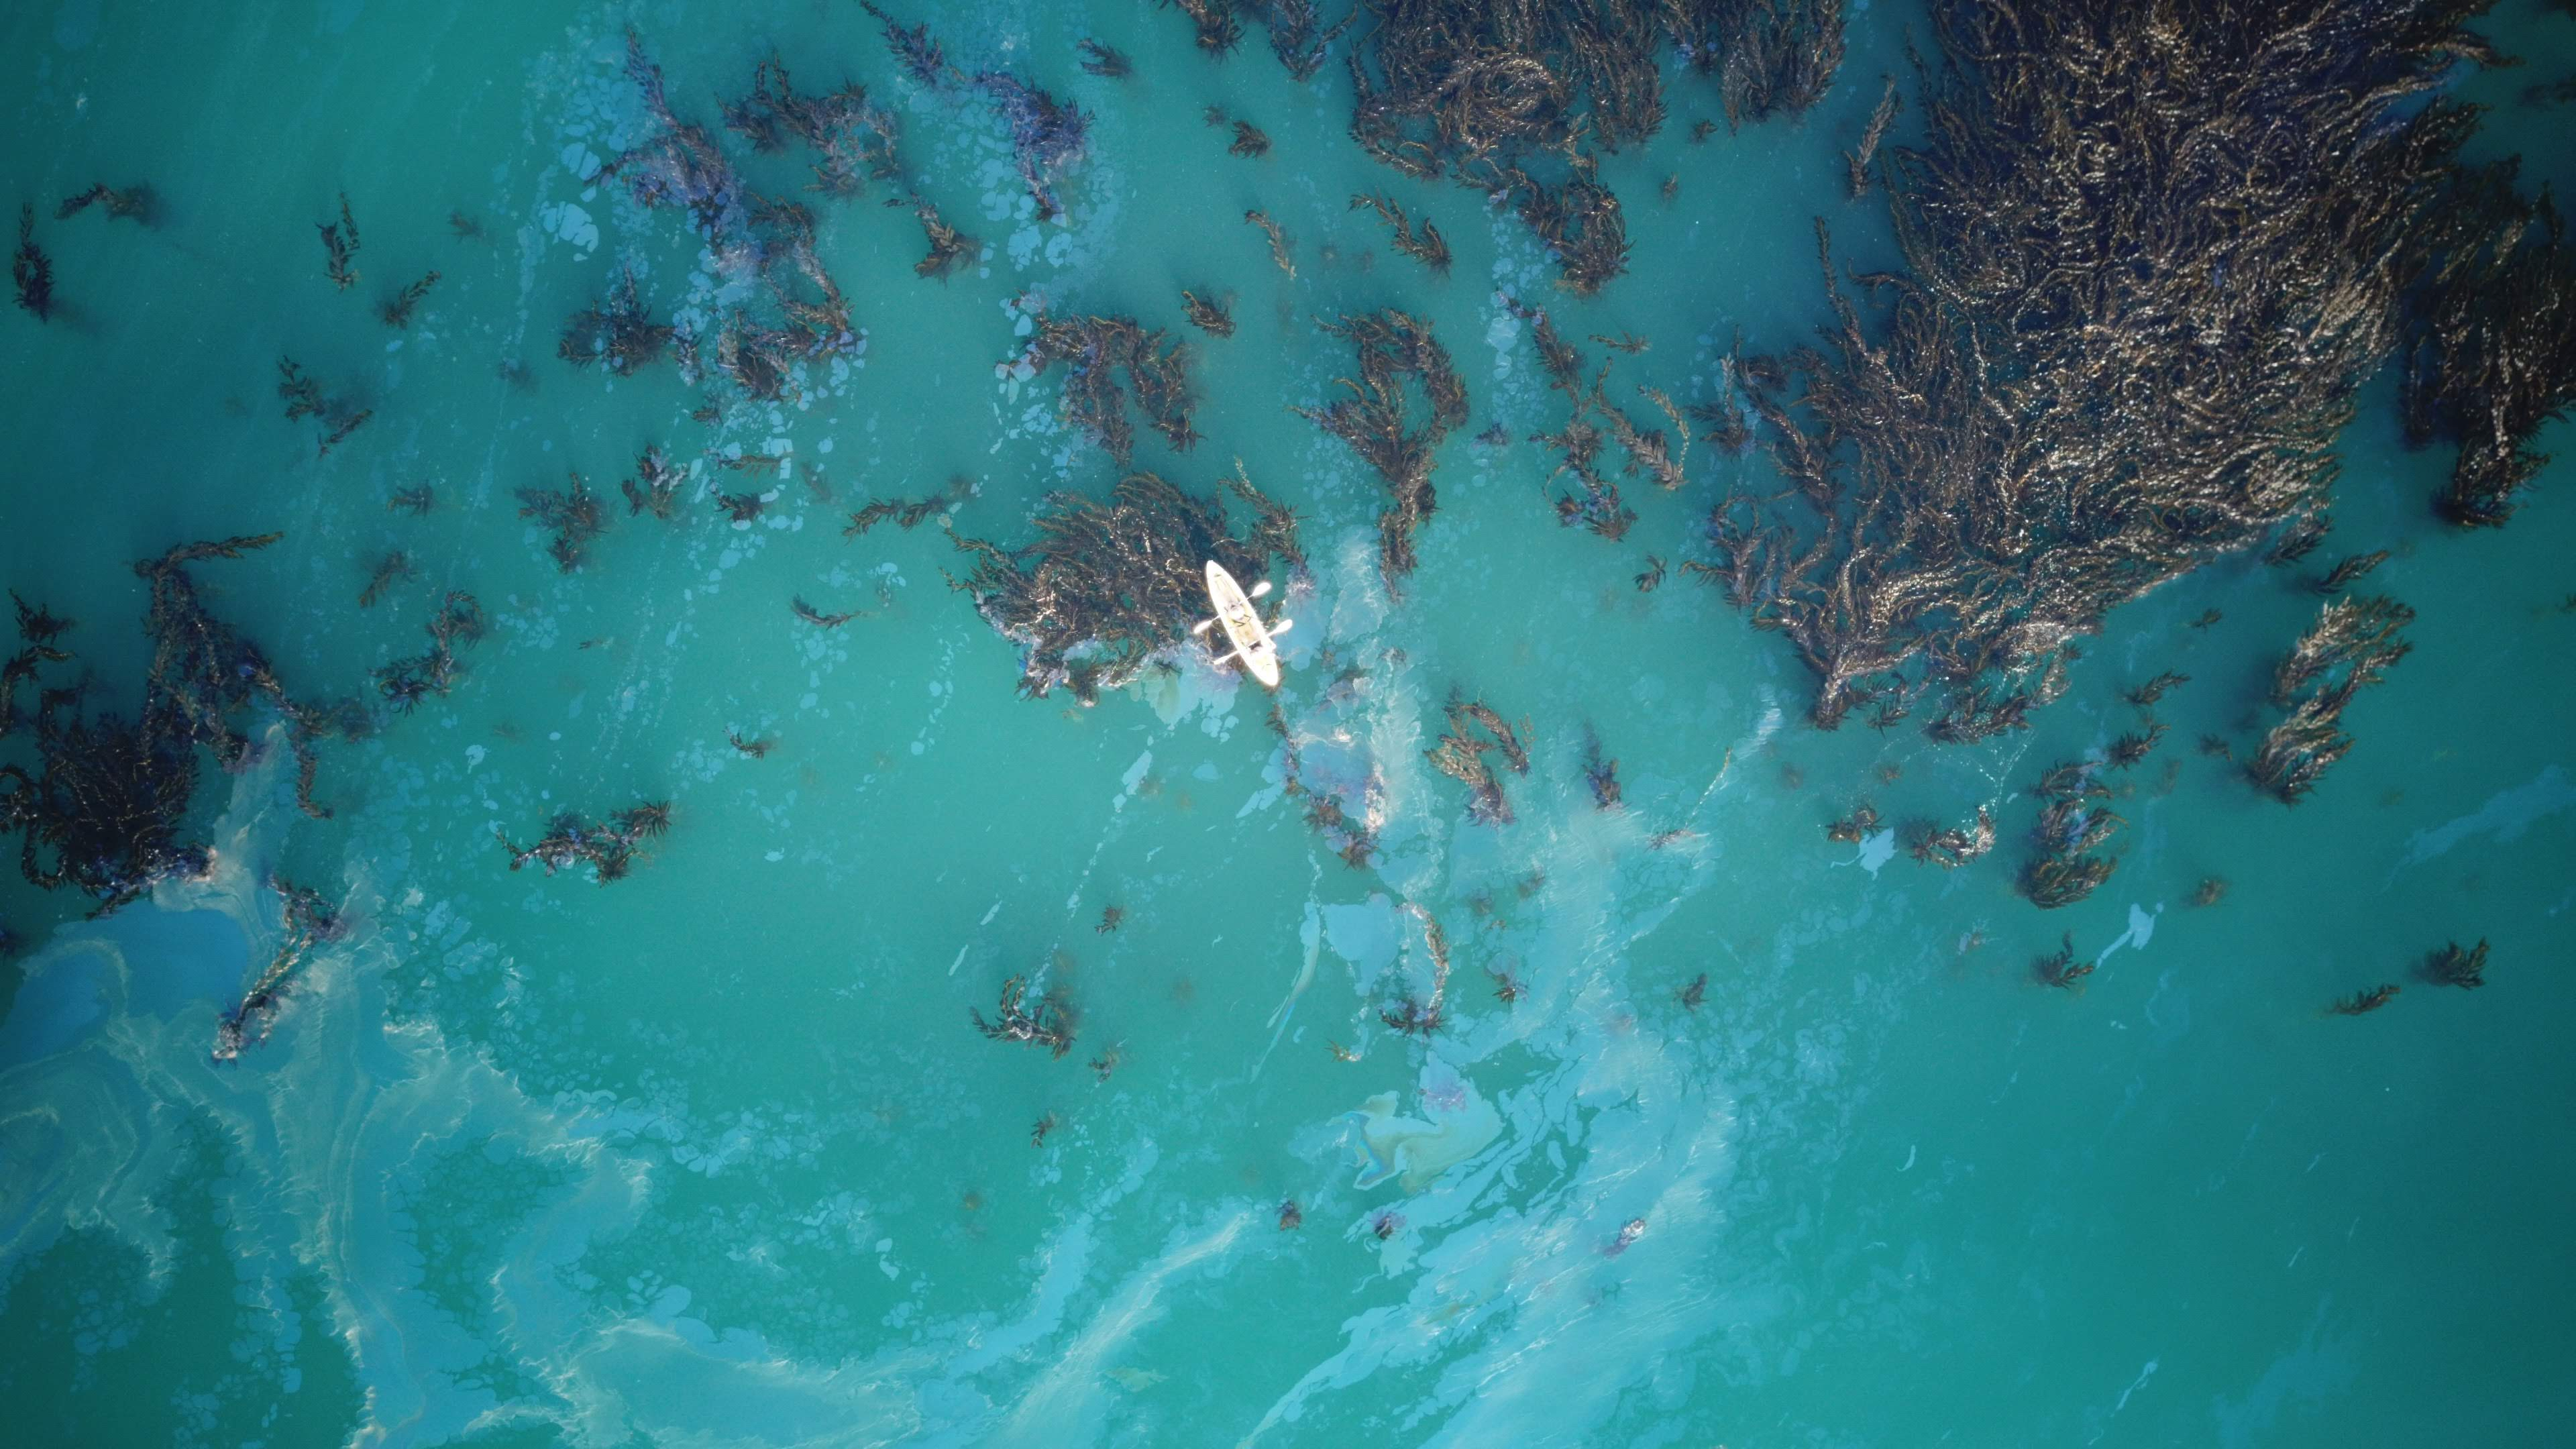 Aerial view of Mason kayaking in a kelp forest